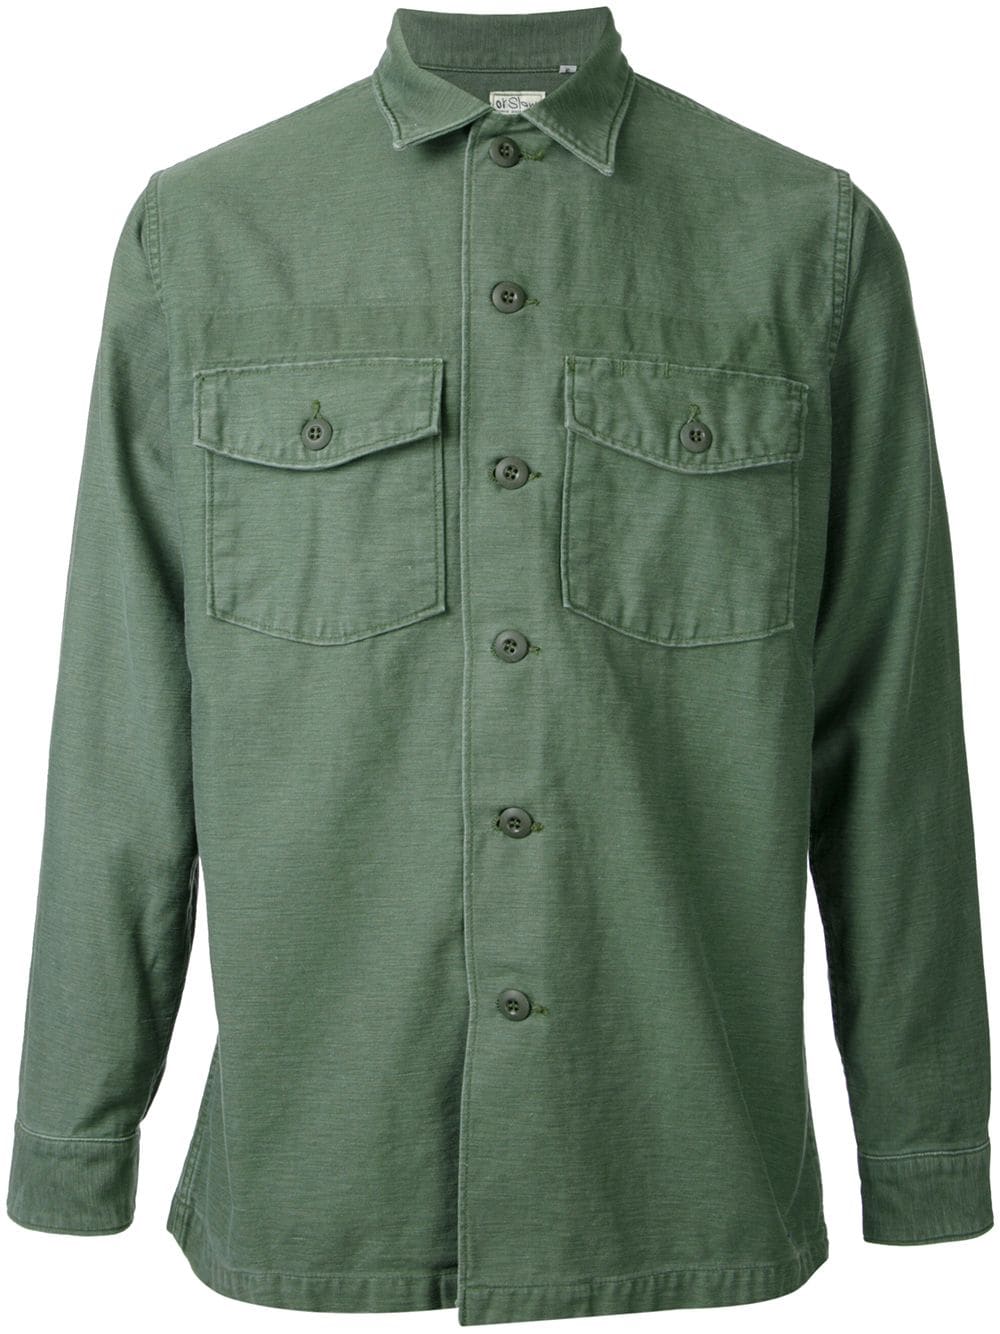 ORSLOW ARMY SHIRT